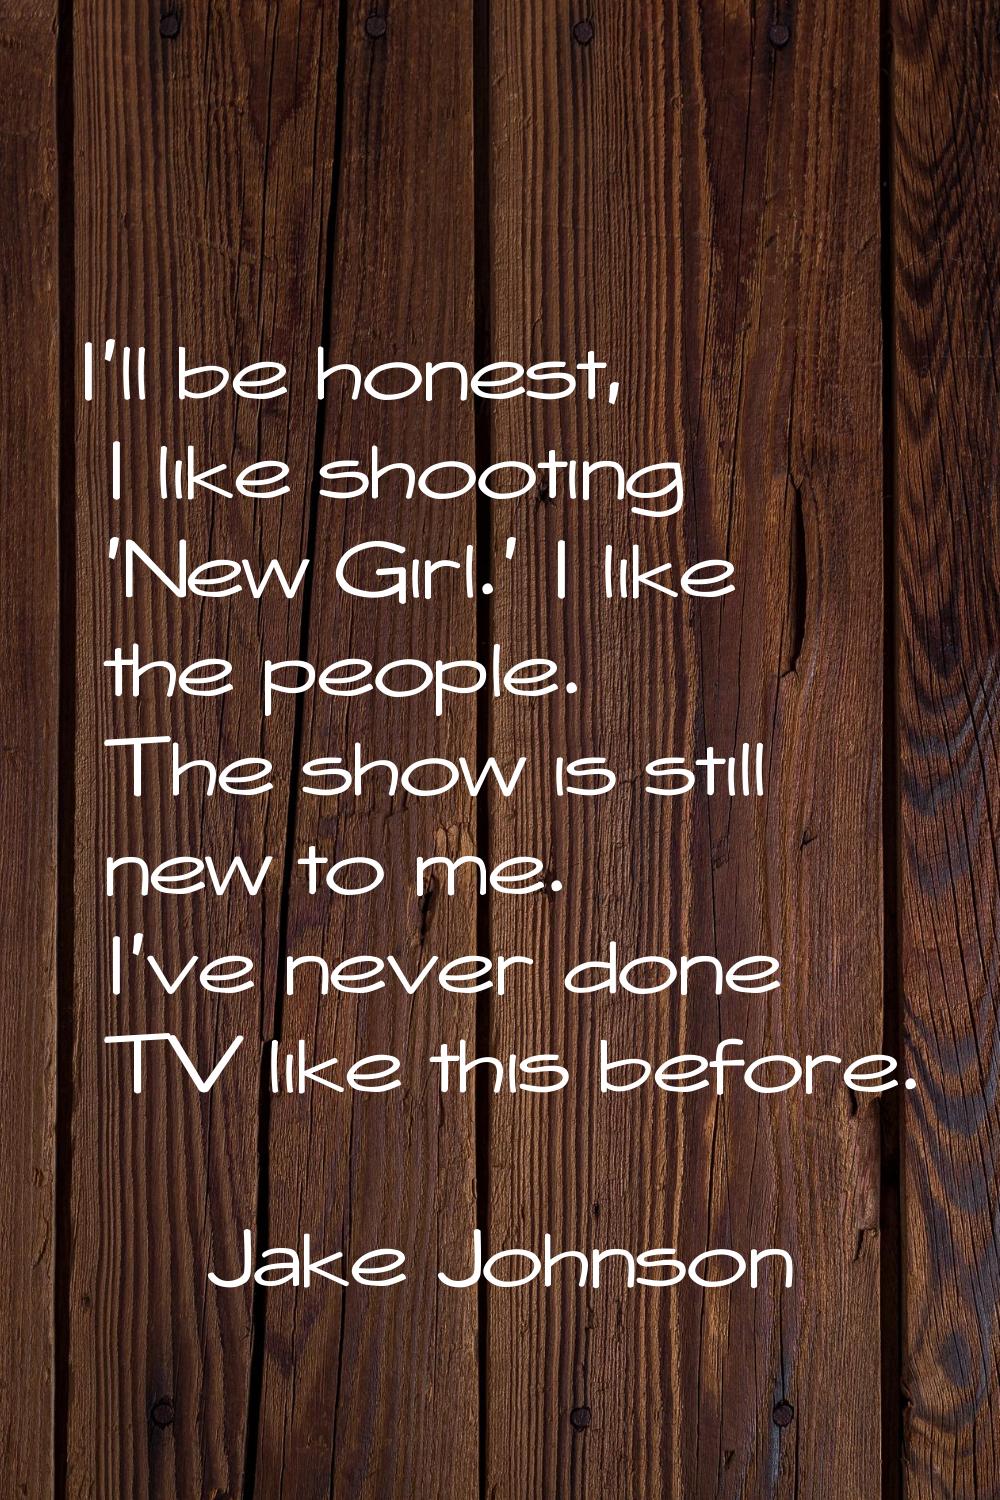 I'll be honest, I like shooting 'New Girl.' I like the people. The show is still new to me. I've ne